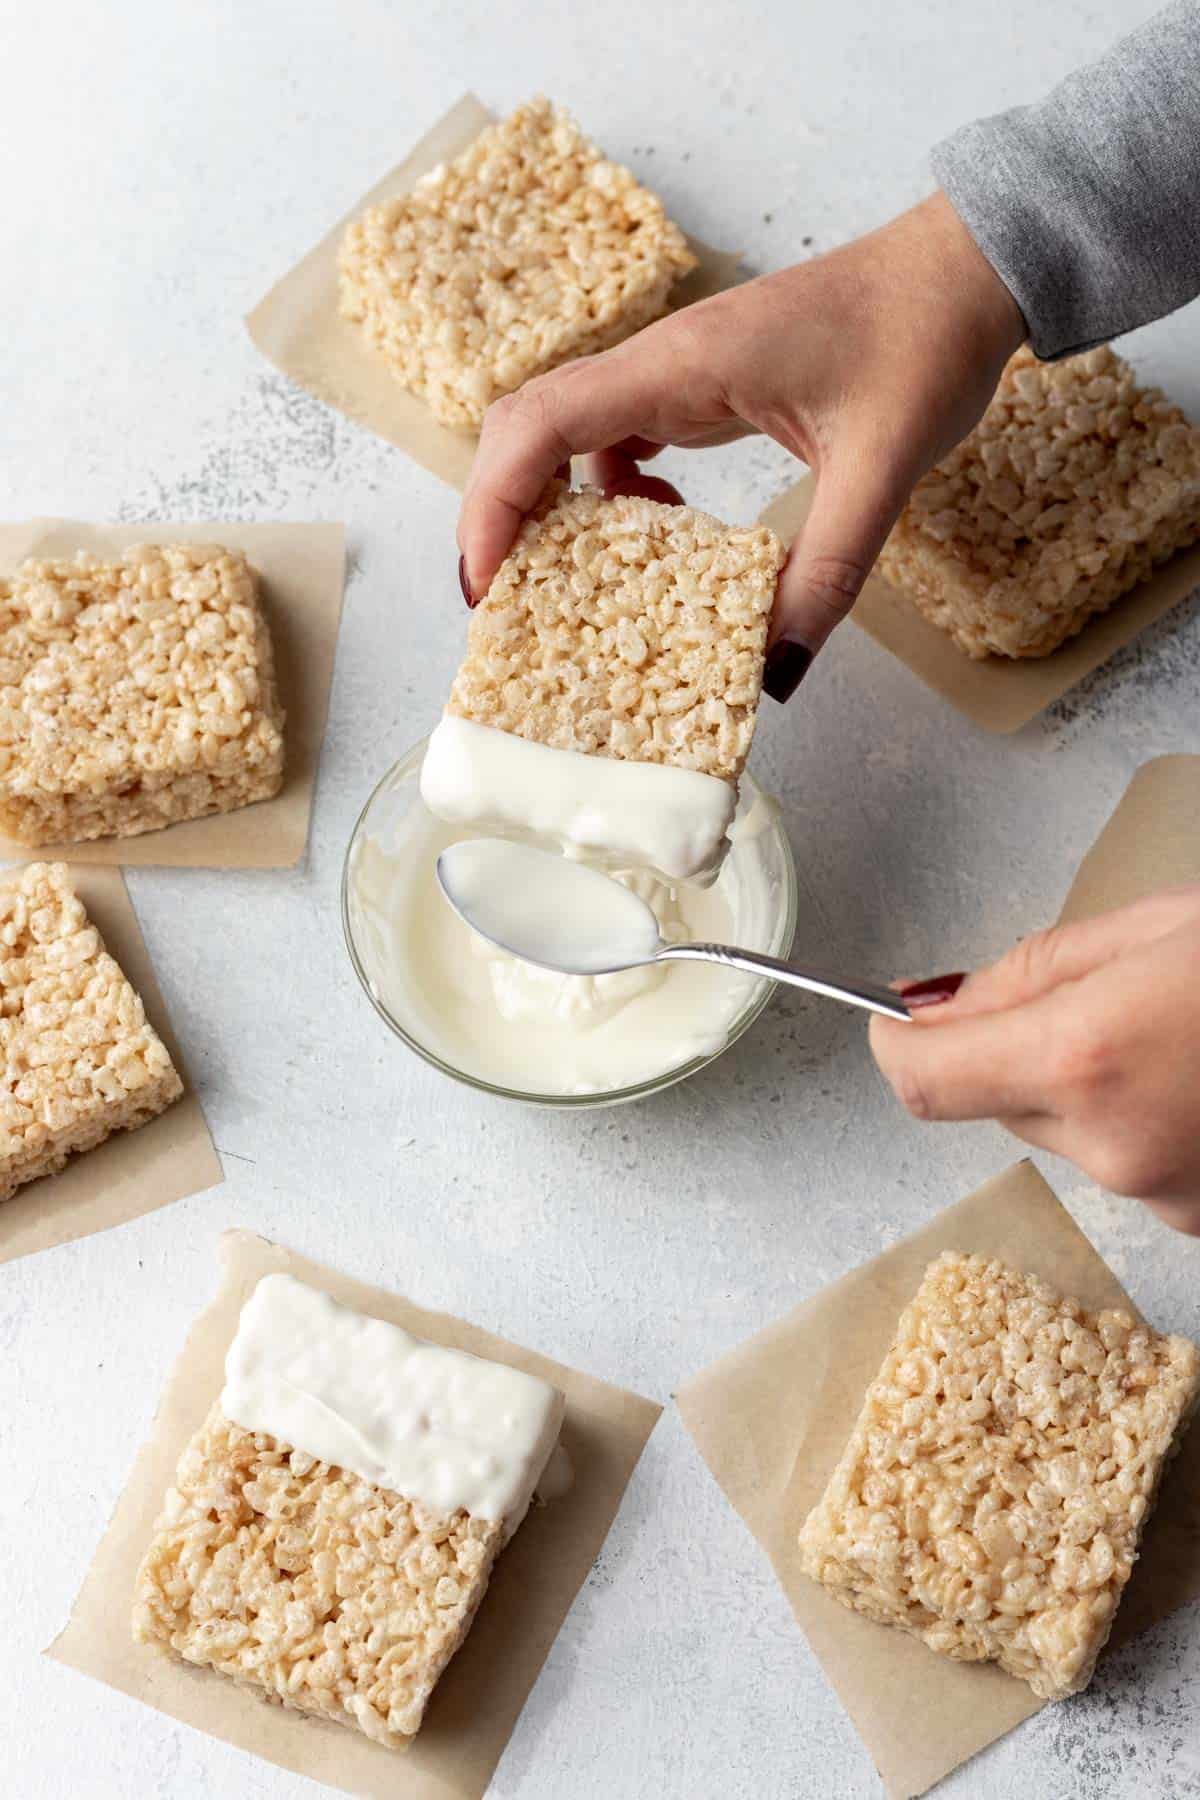 Top of a rice krispie treat dipping in melted white chocolate.